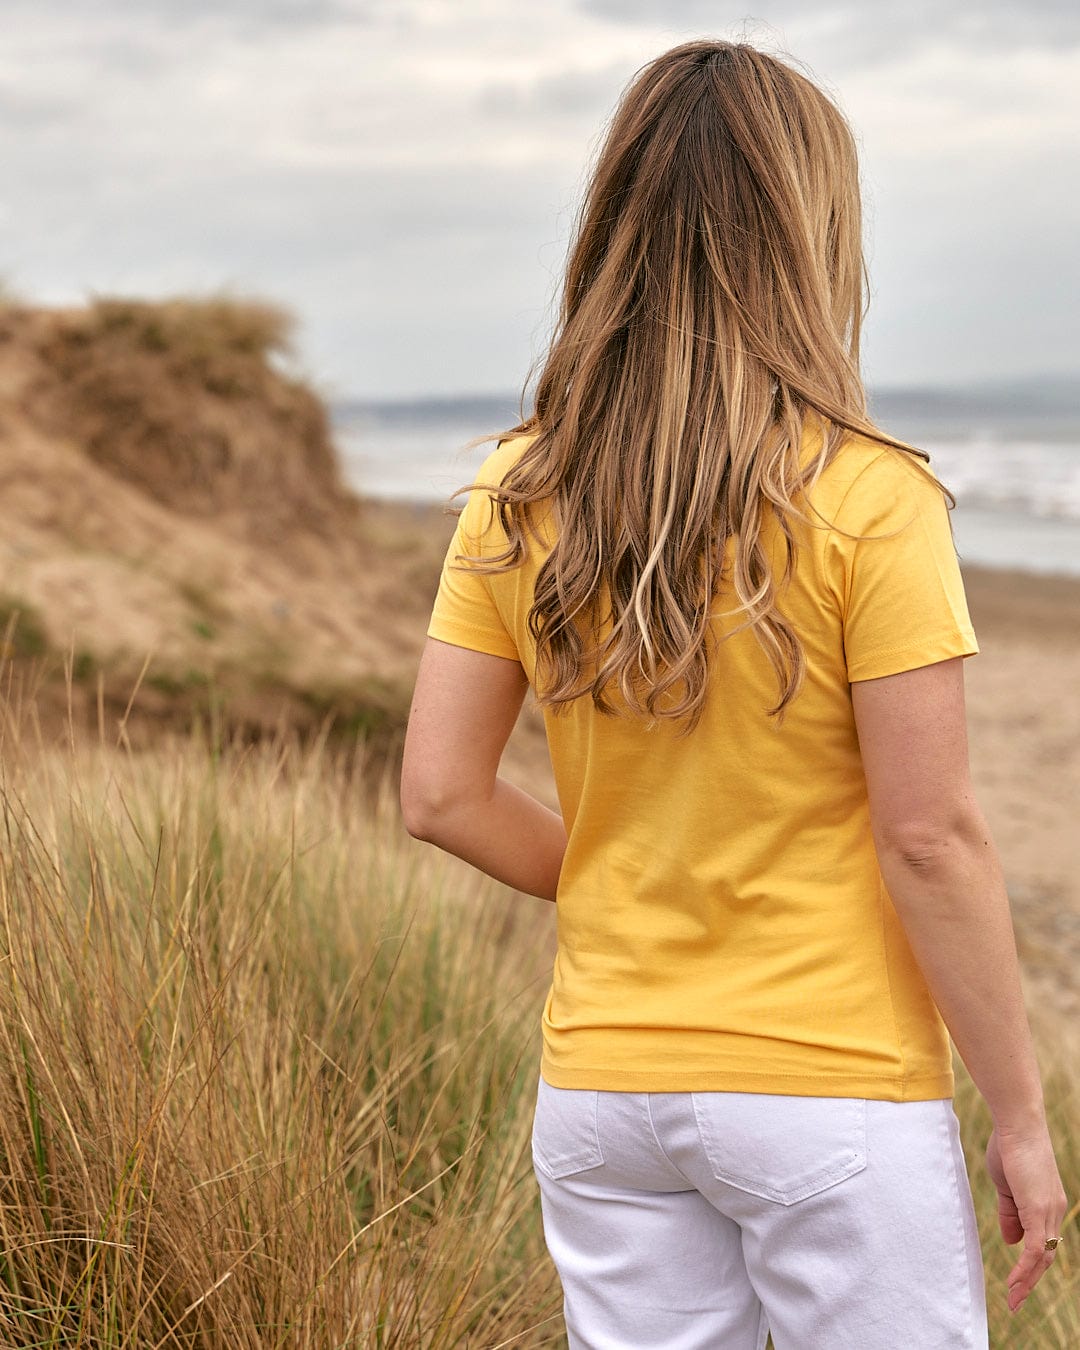 A woman wearing a Saltrock On The Road Cornwall - Womens Short Sleeve T-Shirt - Yellow standing on the beach.